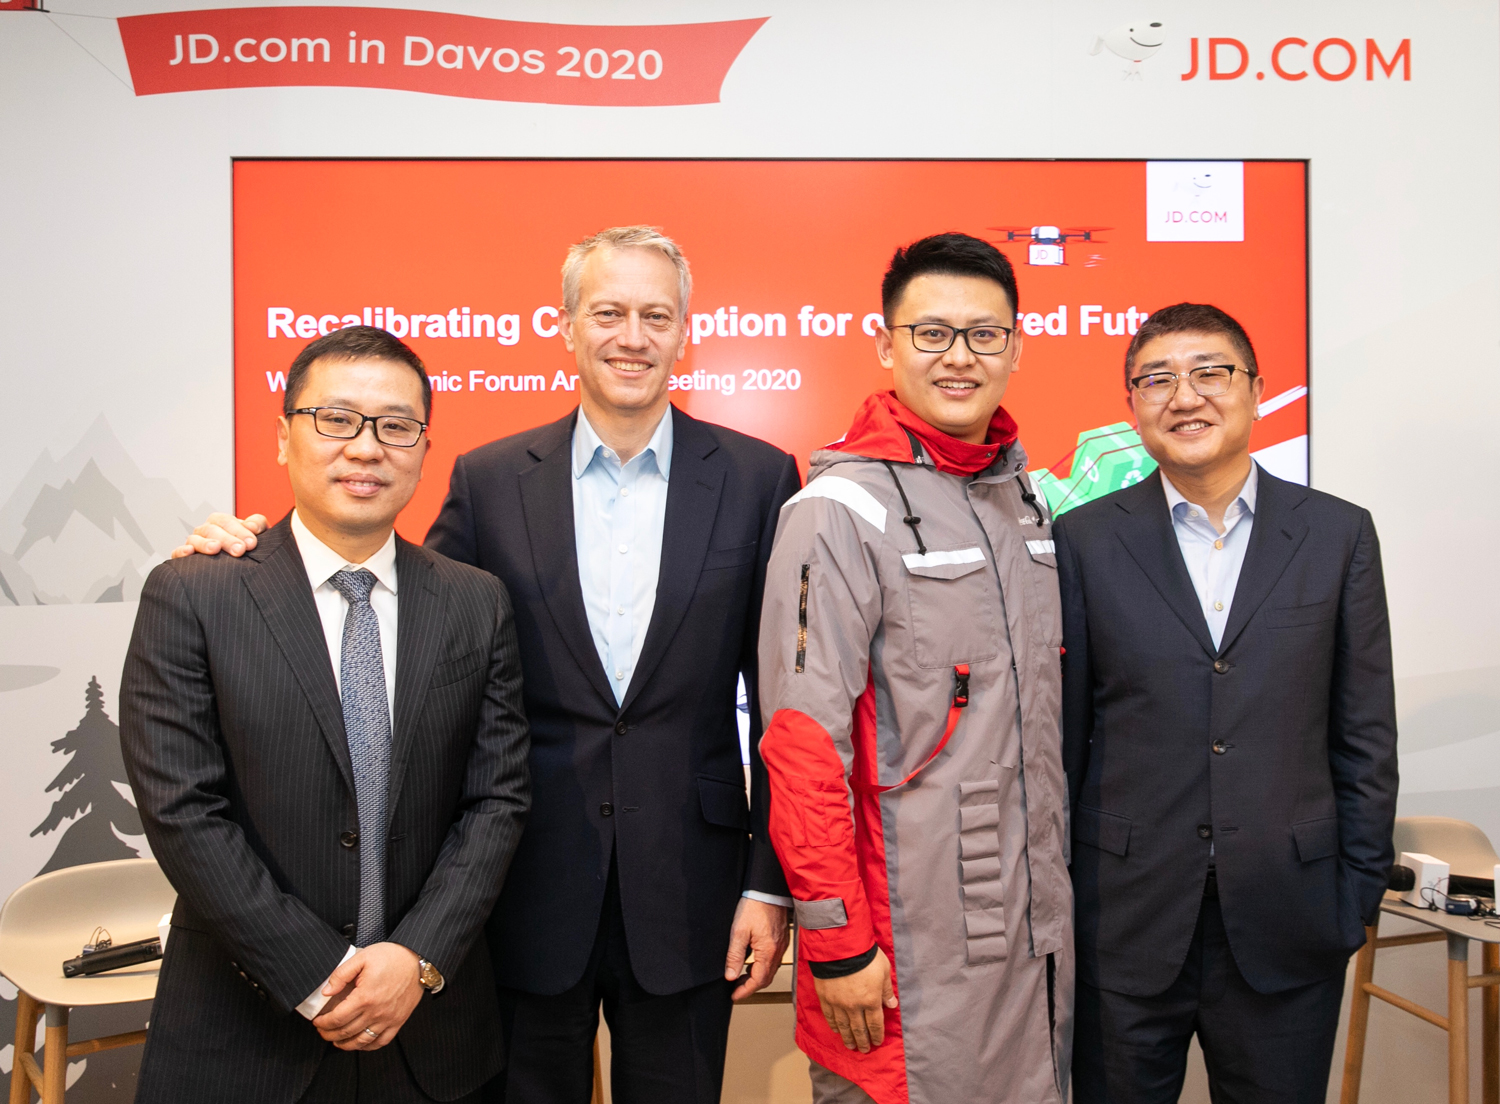 Coca-Cola Chairman and CEO James Quincey (Left 2), JD Logistics CEO Zhenhui Wang (Left 1), JD Retail CEO Lei Xu (Right 1) took a group photo with a JD staff wearing a uniform made of recycled PET (rPET) materials co-created.